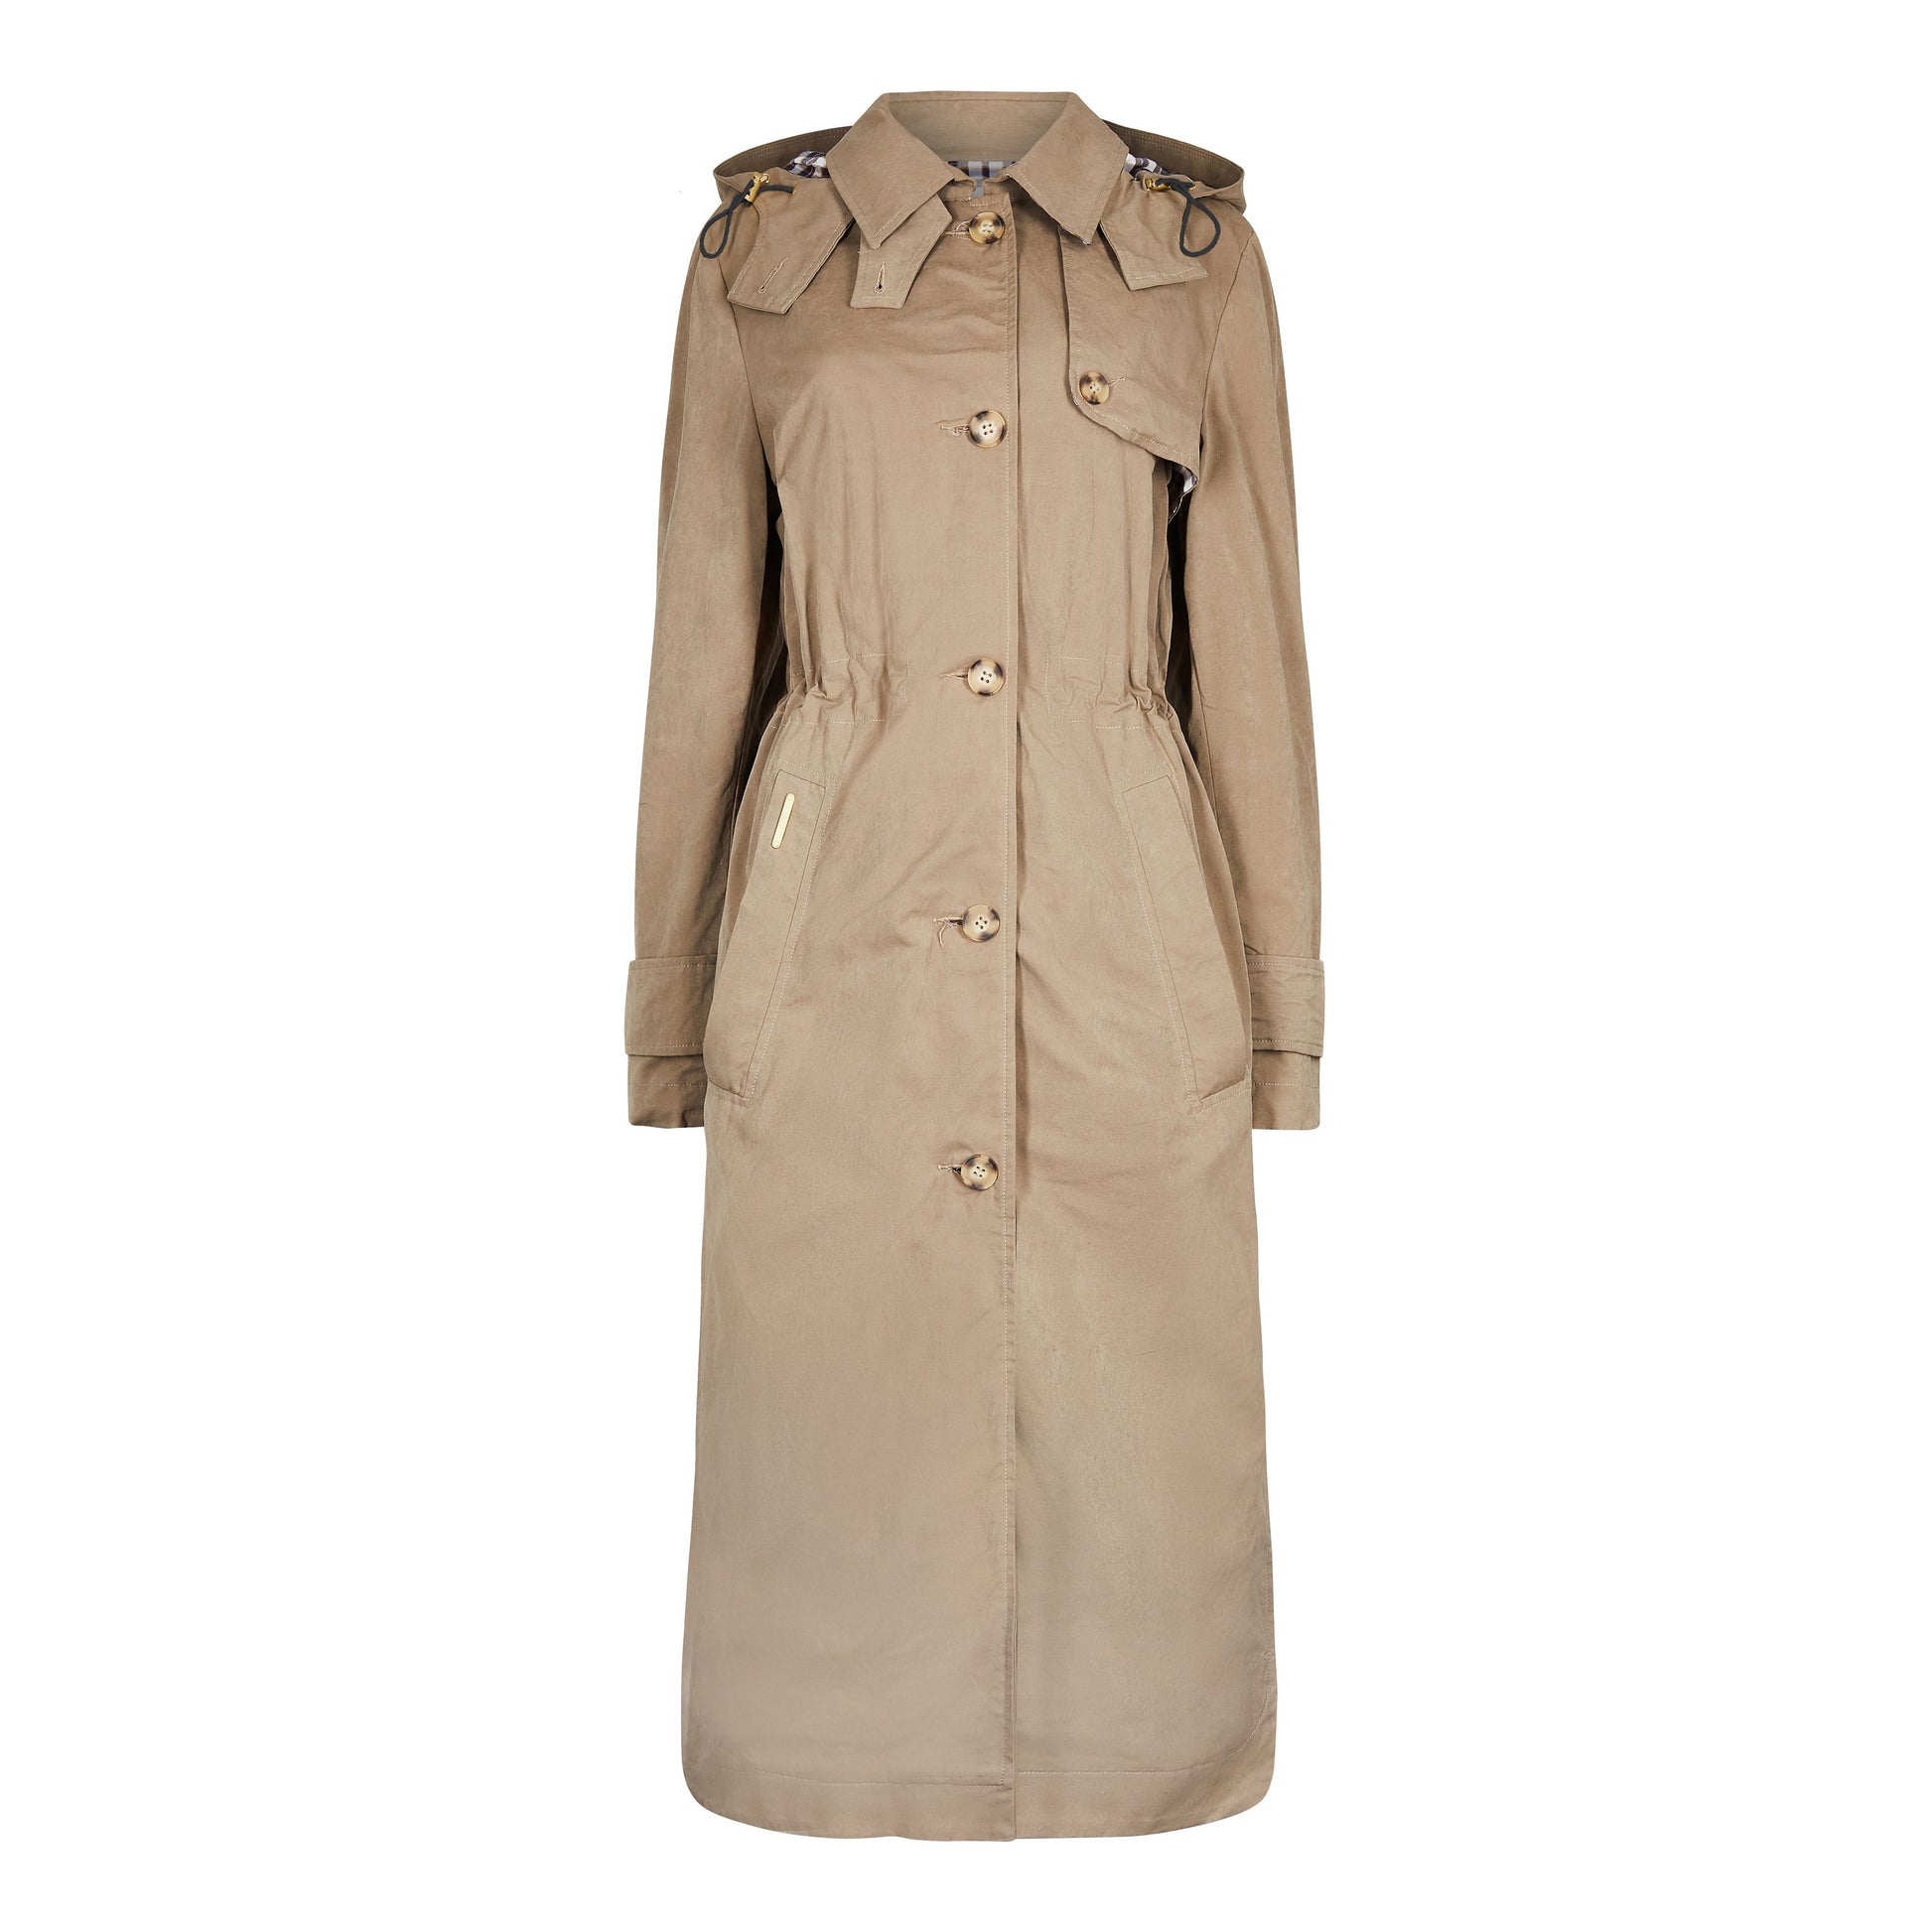 Classic Ladies British Trench Coat in Taupe coloured Cotton with a Contrast Check Lining